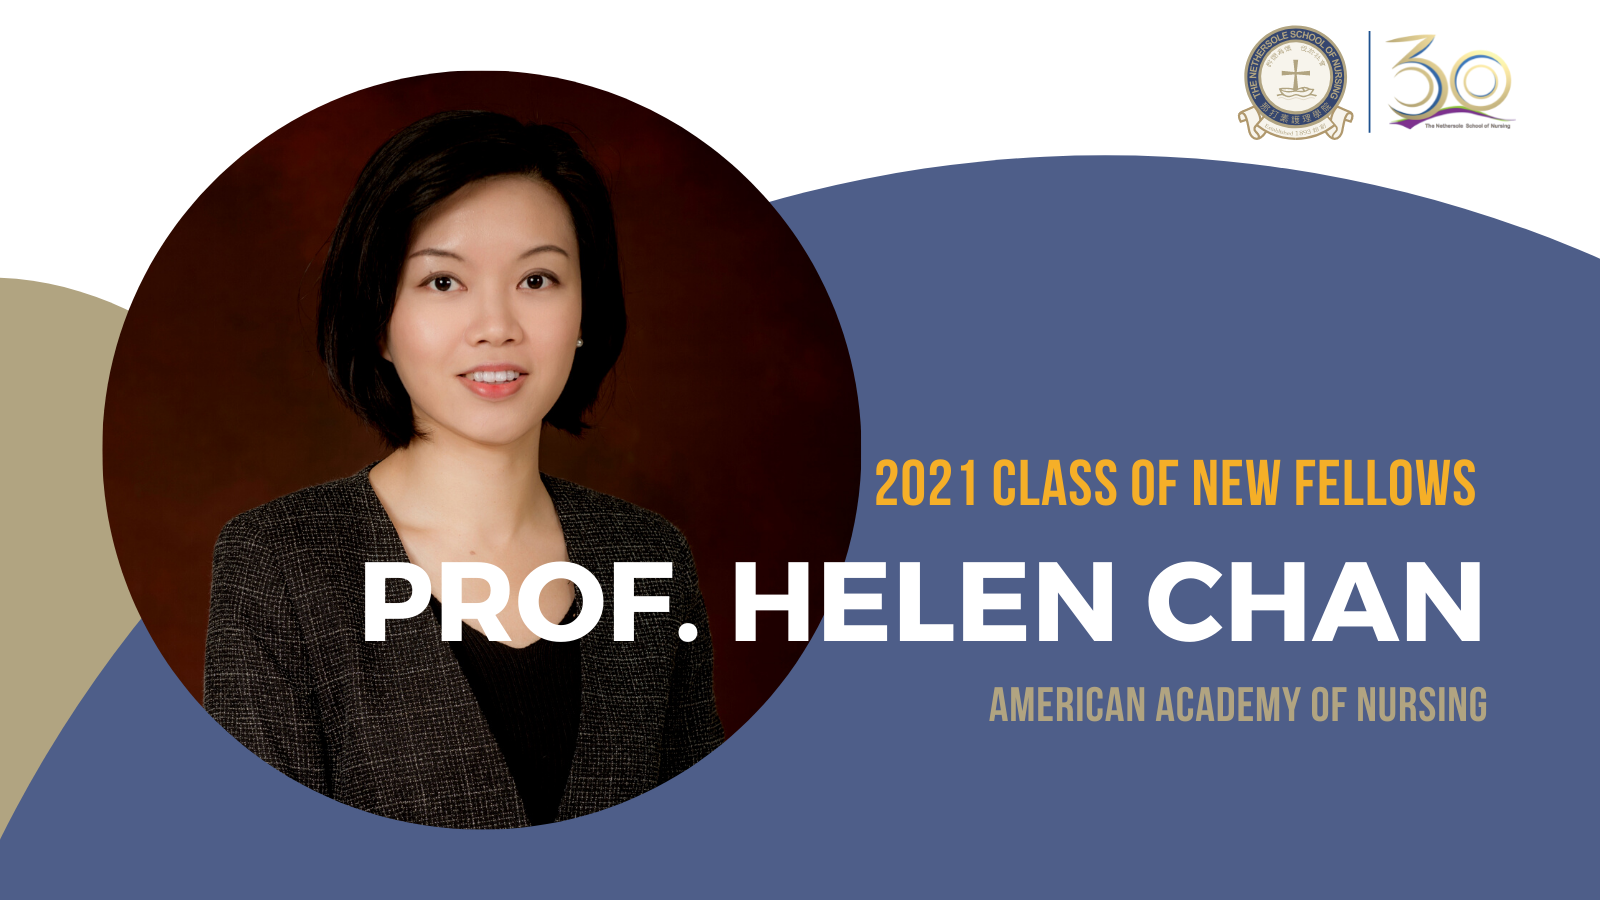 Professor Helen Chan for being selected As Fellow Of The American Academy Of Nursing